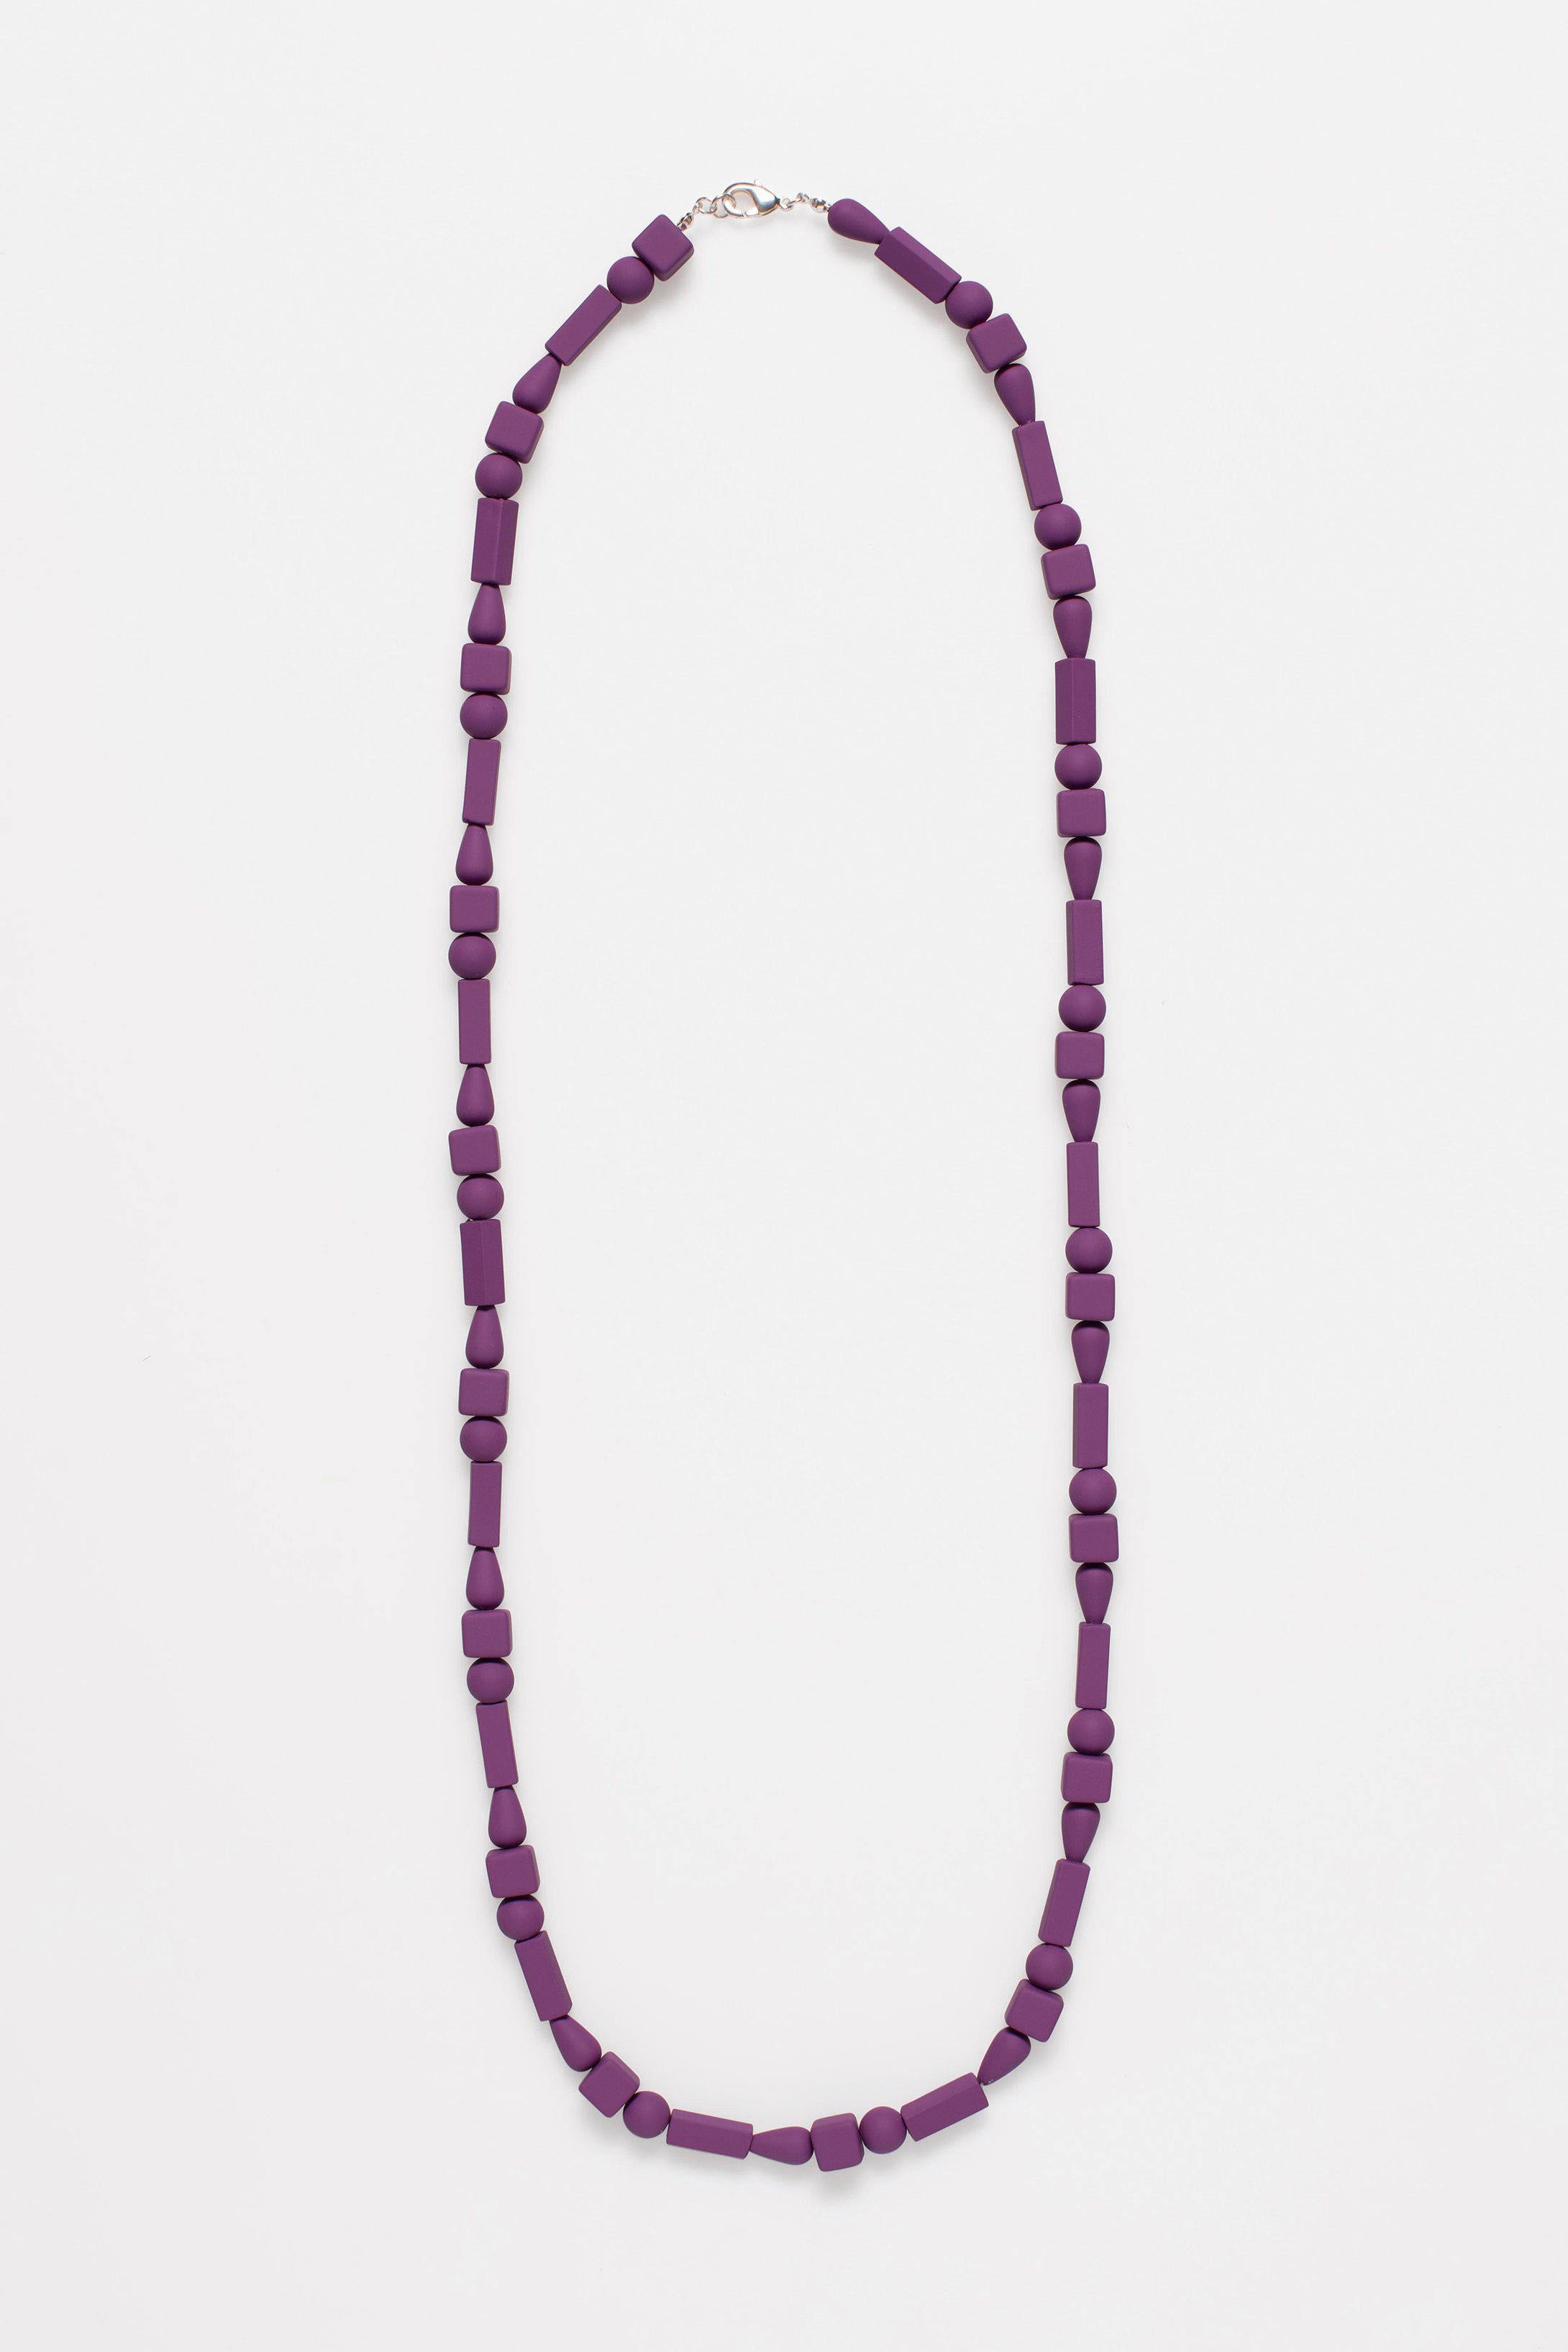 Reyni Coloured Long Bead Necklace | THISTLE PURPLE